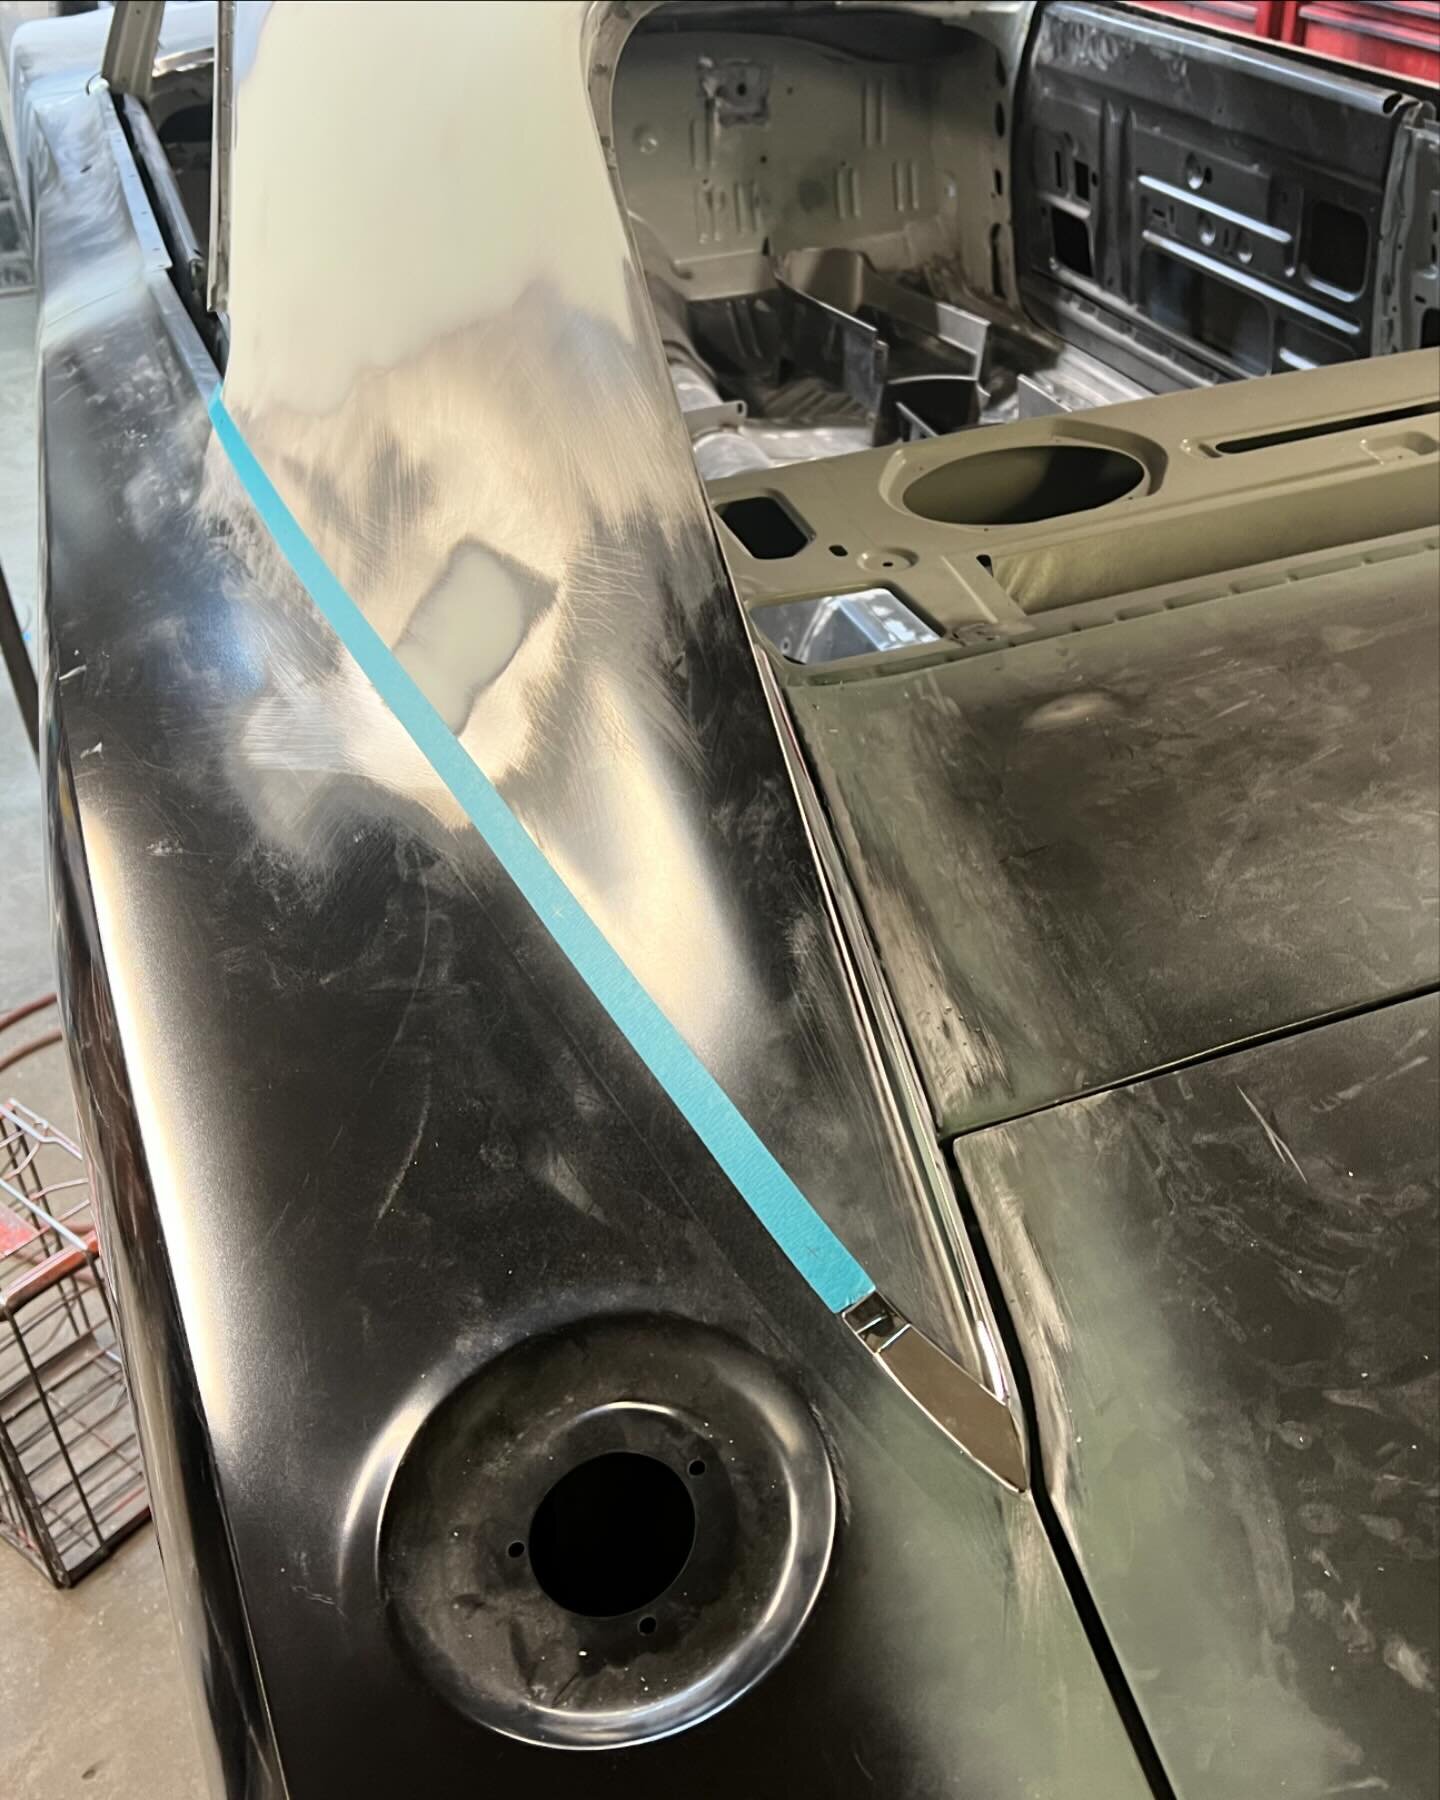 1968 Dodge Charger RT roof seams and cowl seams plastic work done and high build primer #longvalleyautobody #akzonobelrefinish #colorbuild #1968dodgechargerrt